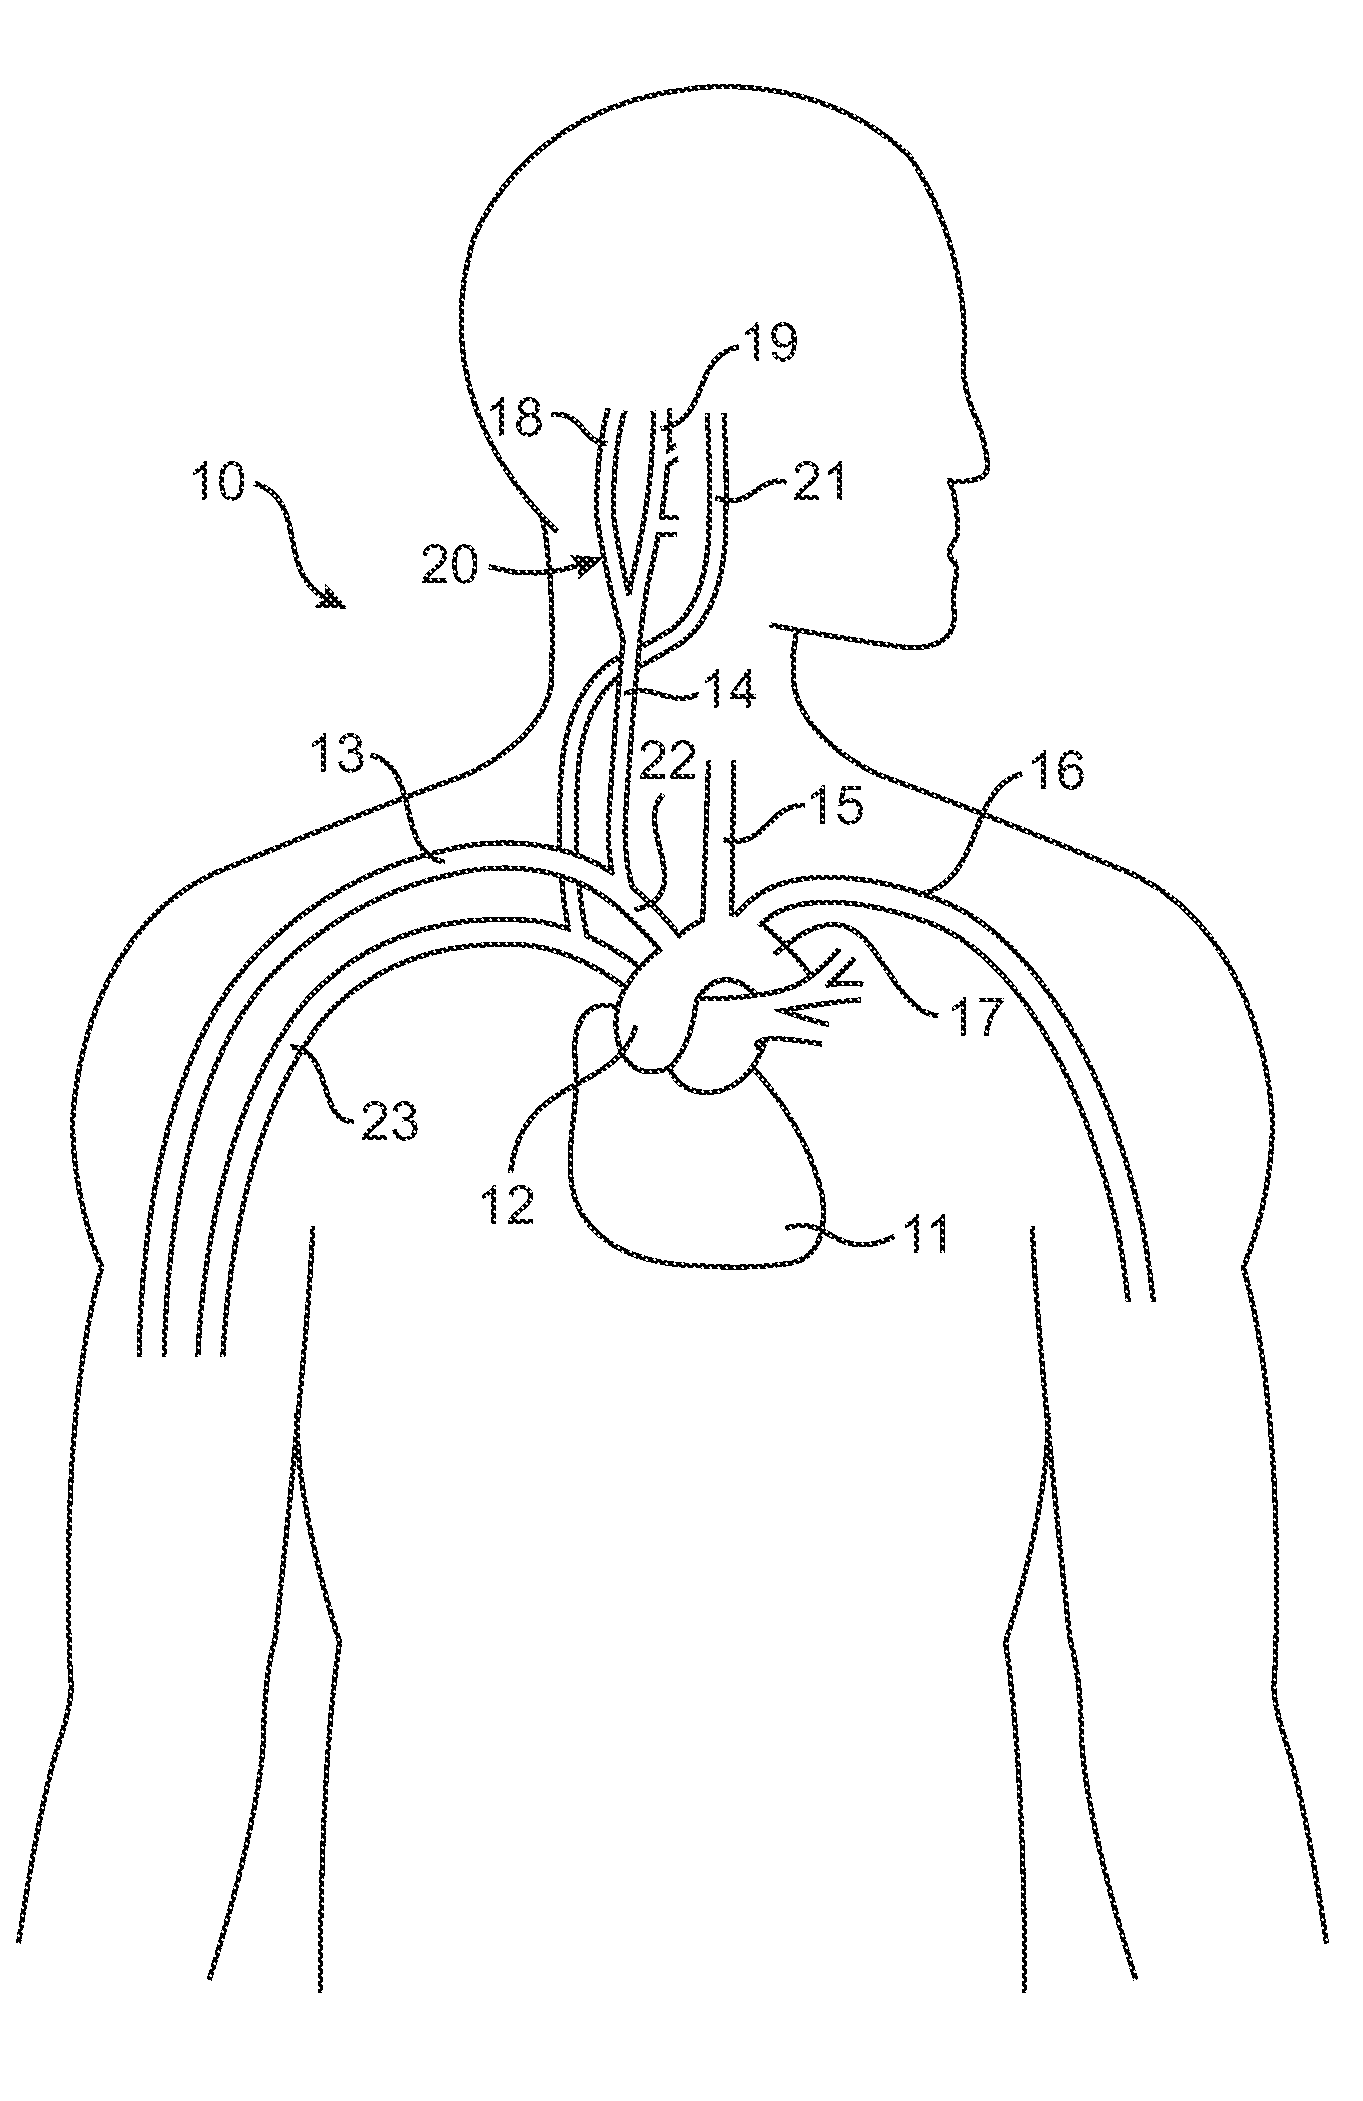 Baroreflex activation therapy device with pacing cardiac electrical signal detection capability